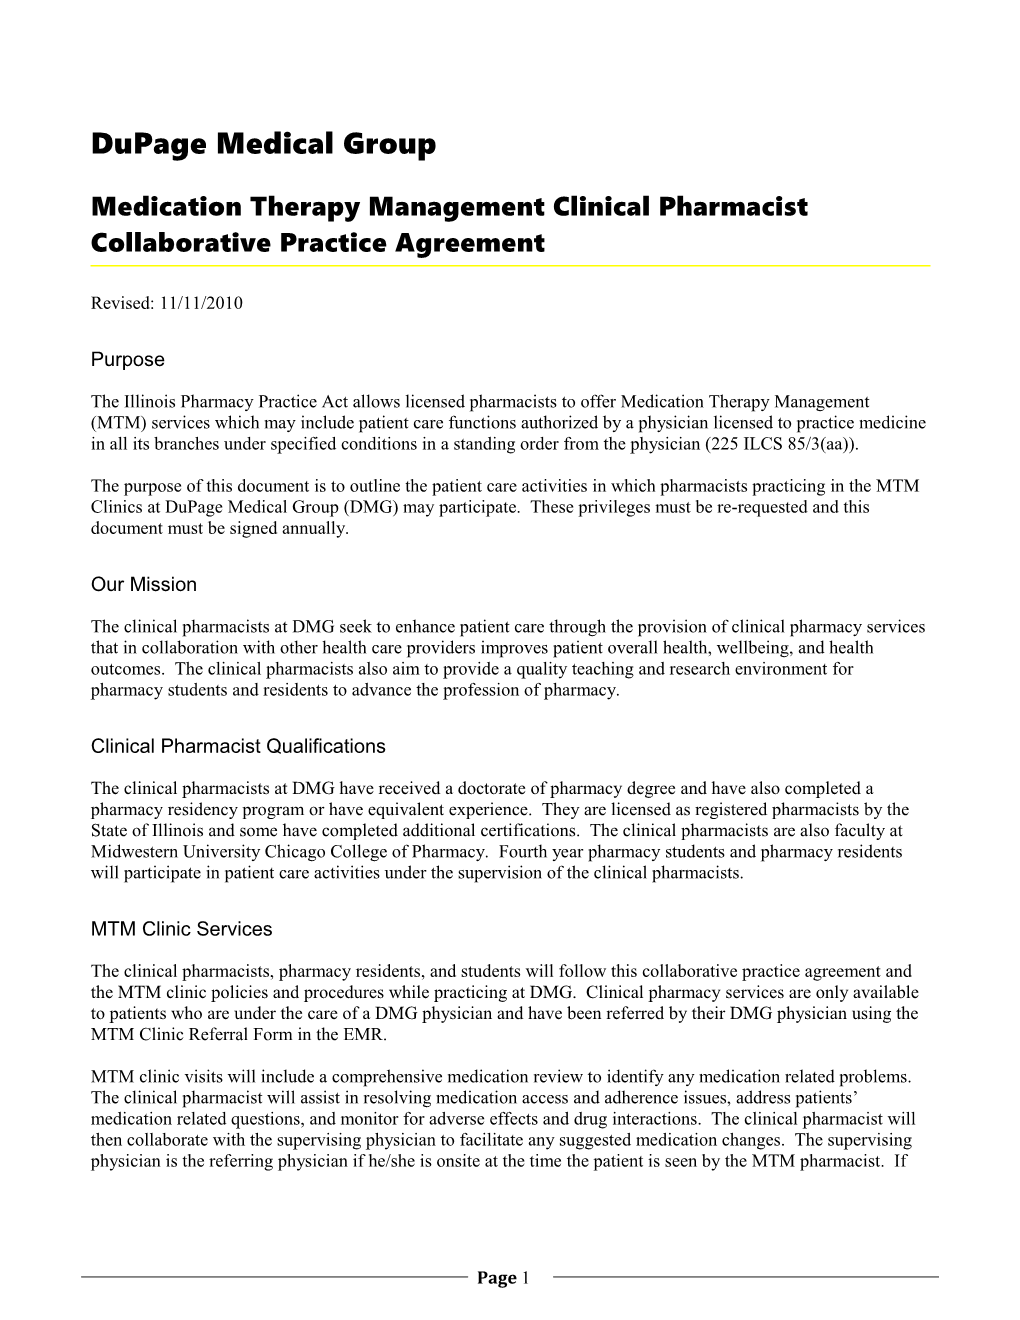 Medication Therapy Management Clinical Pharmacist Collaborative Practice Agreement